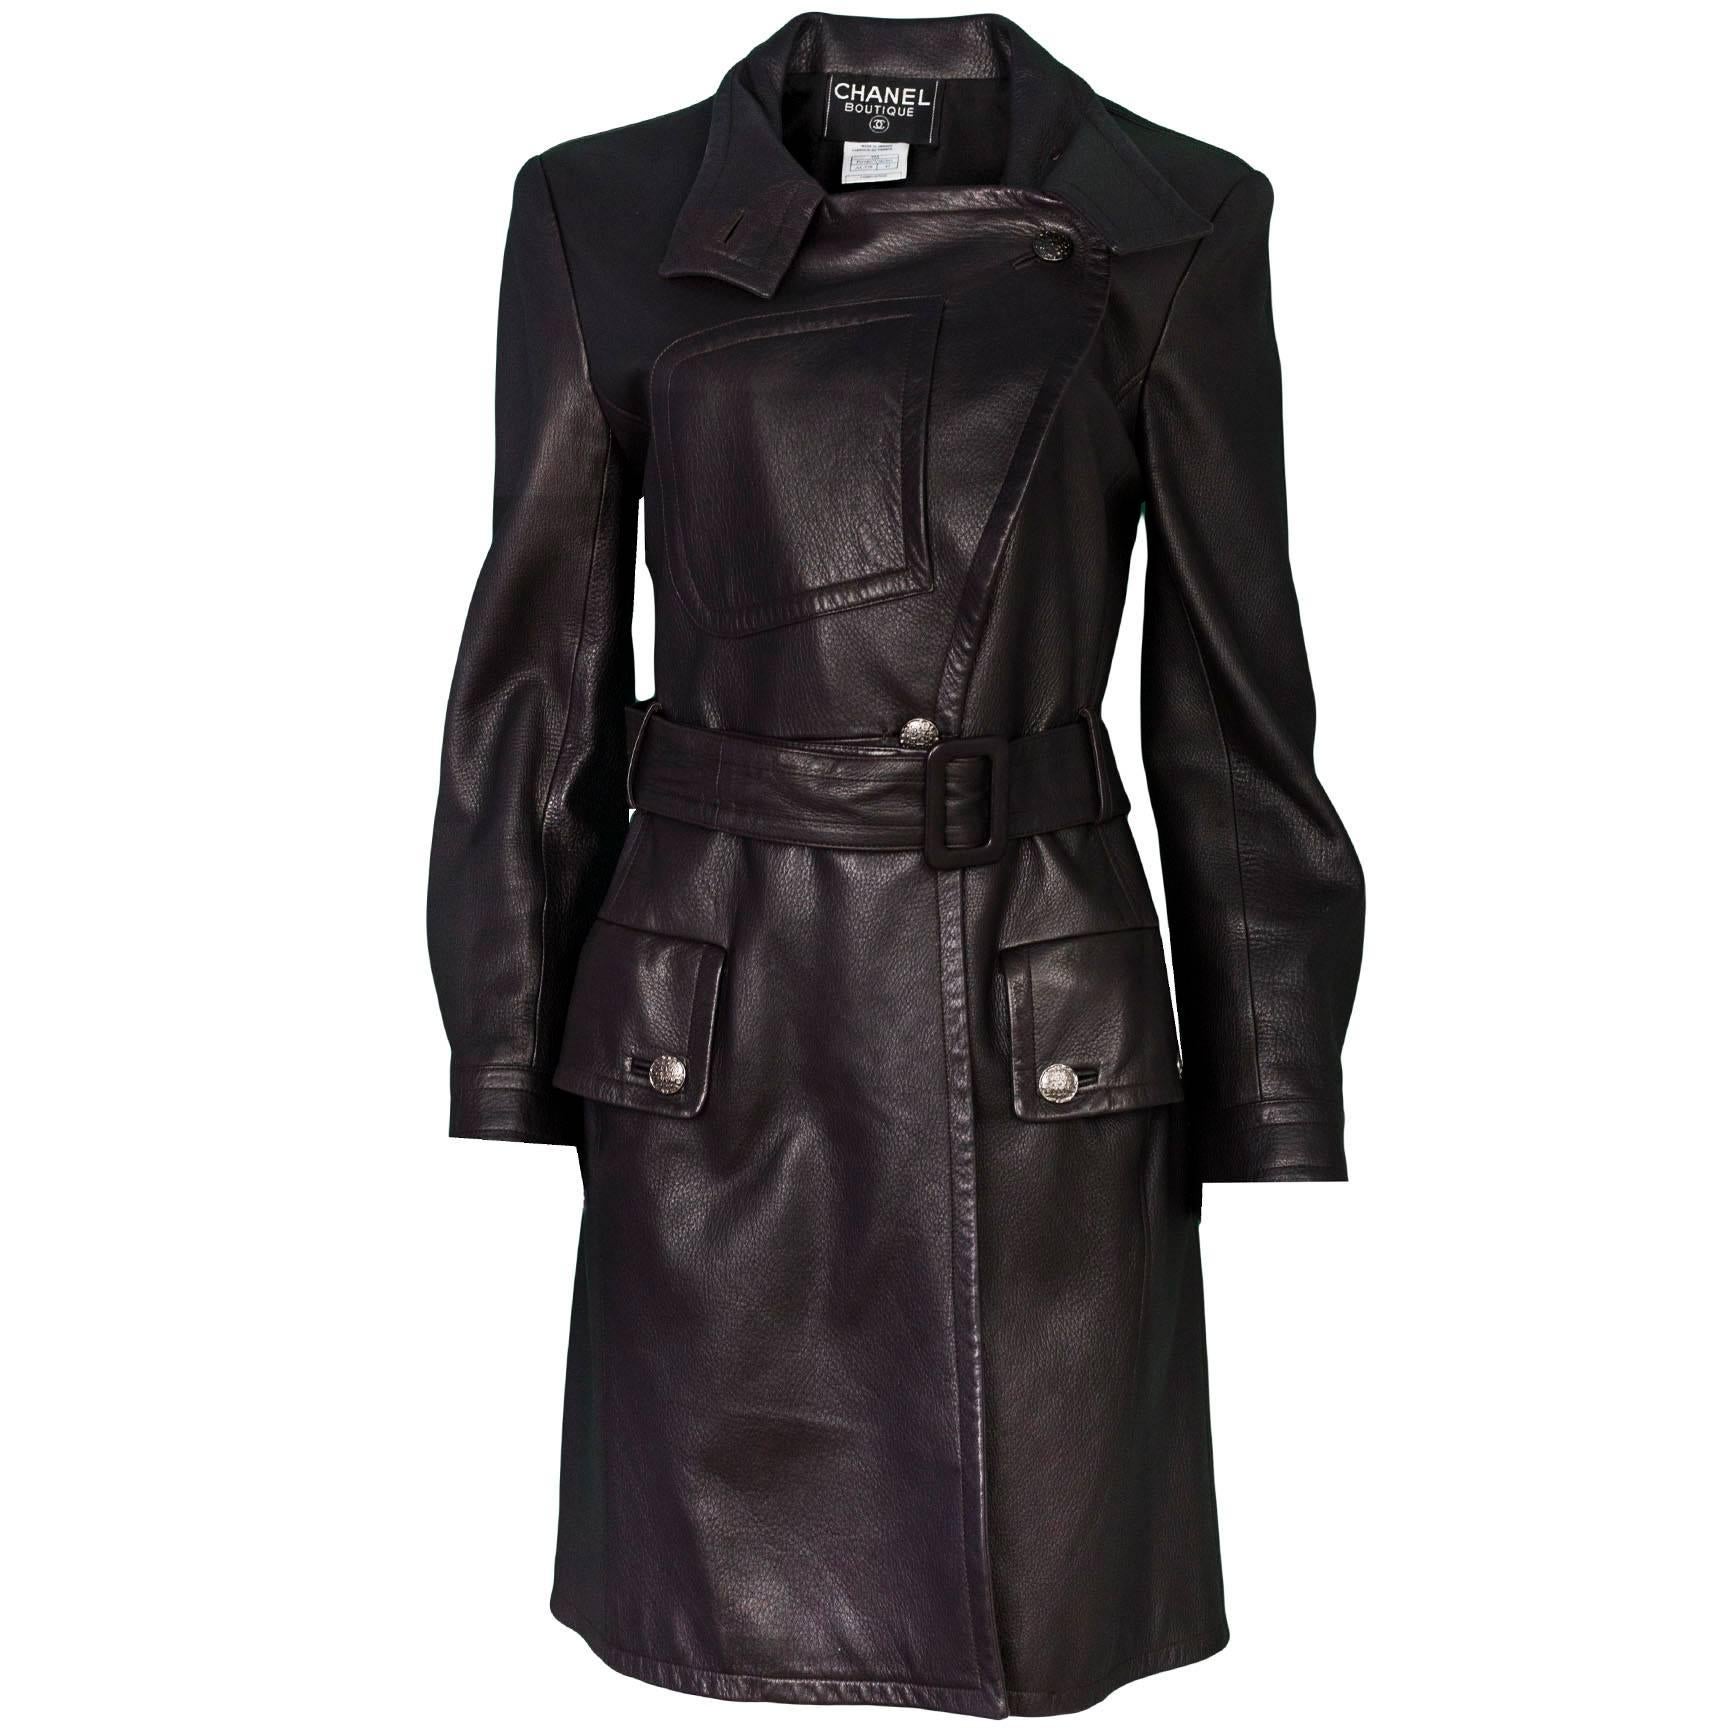 Chanel Dark Brown Leather Trench Coat sz FR42